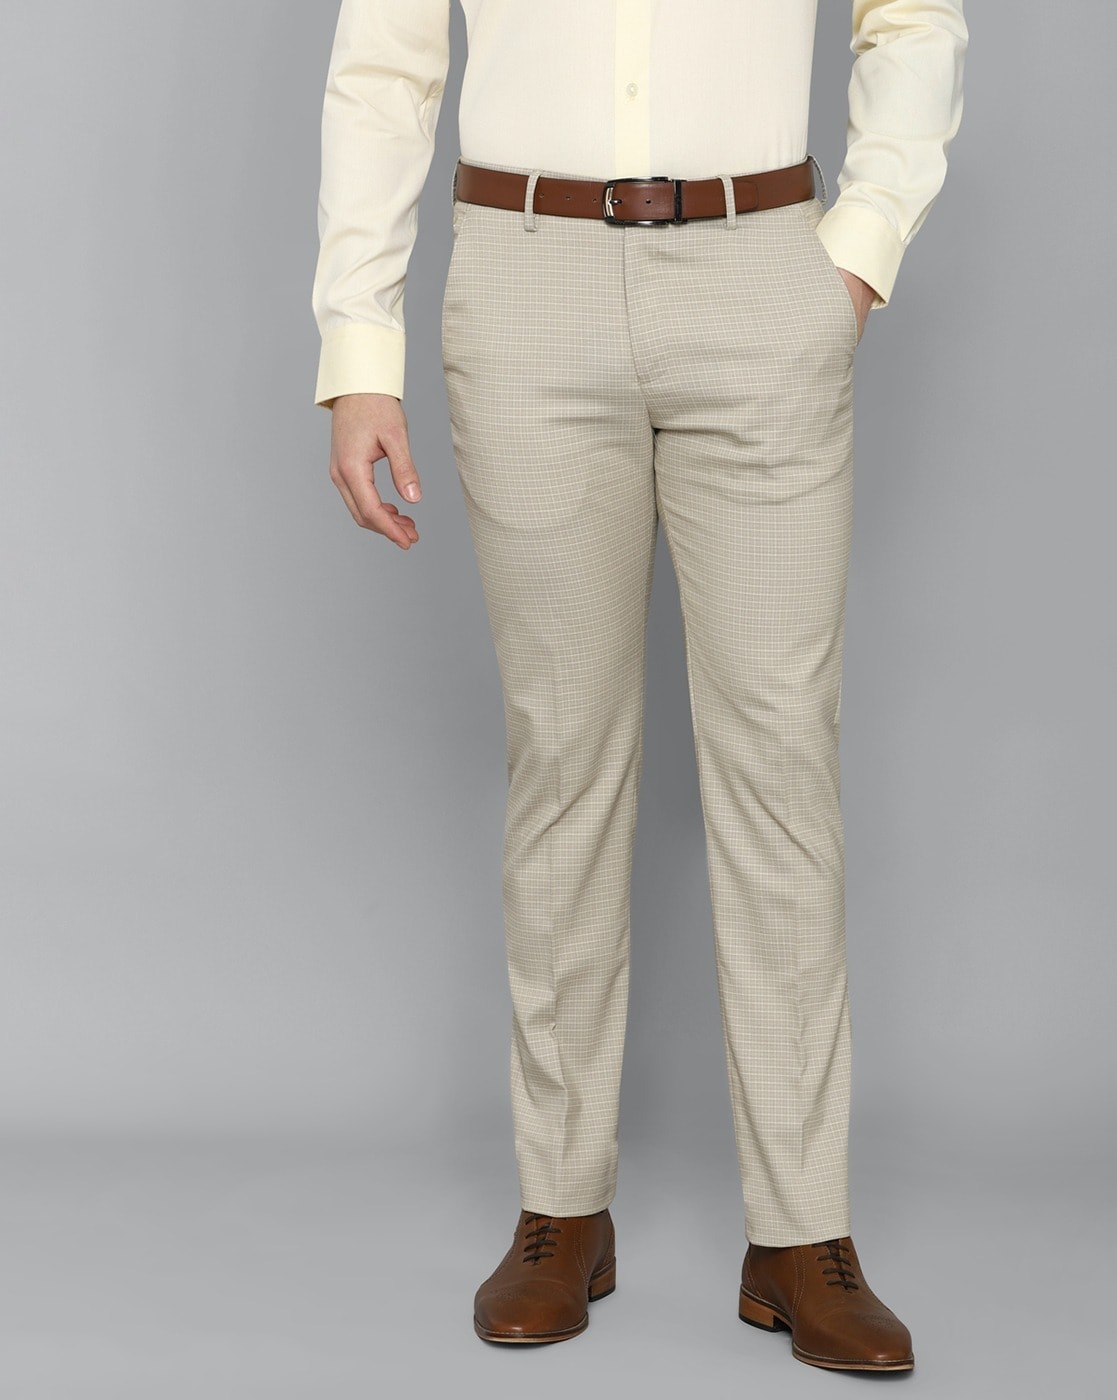 Buy Regular Fit Men Trousers Beige Blue and Green Combo of 3 Polyester  Blend for Best Price, Reviews, Free Shipping